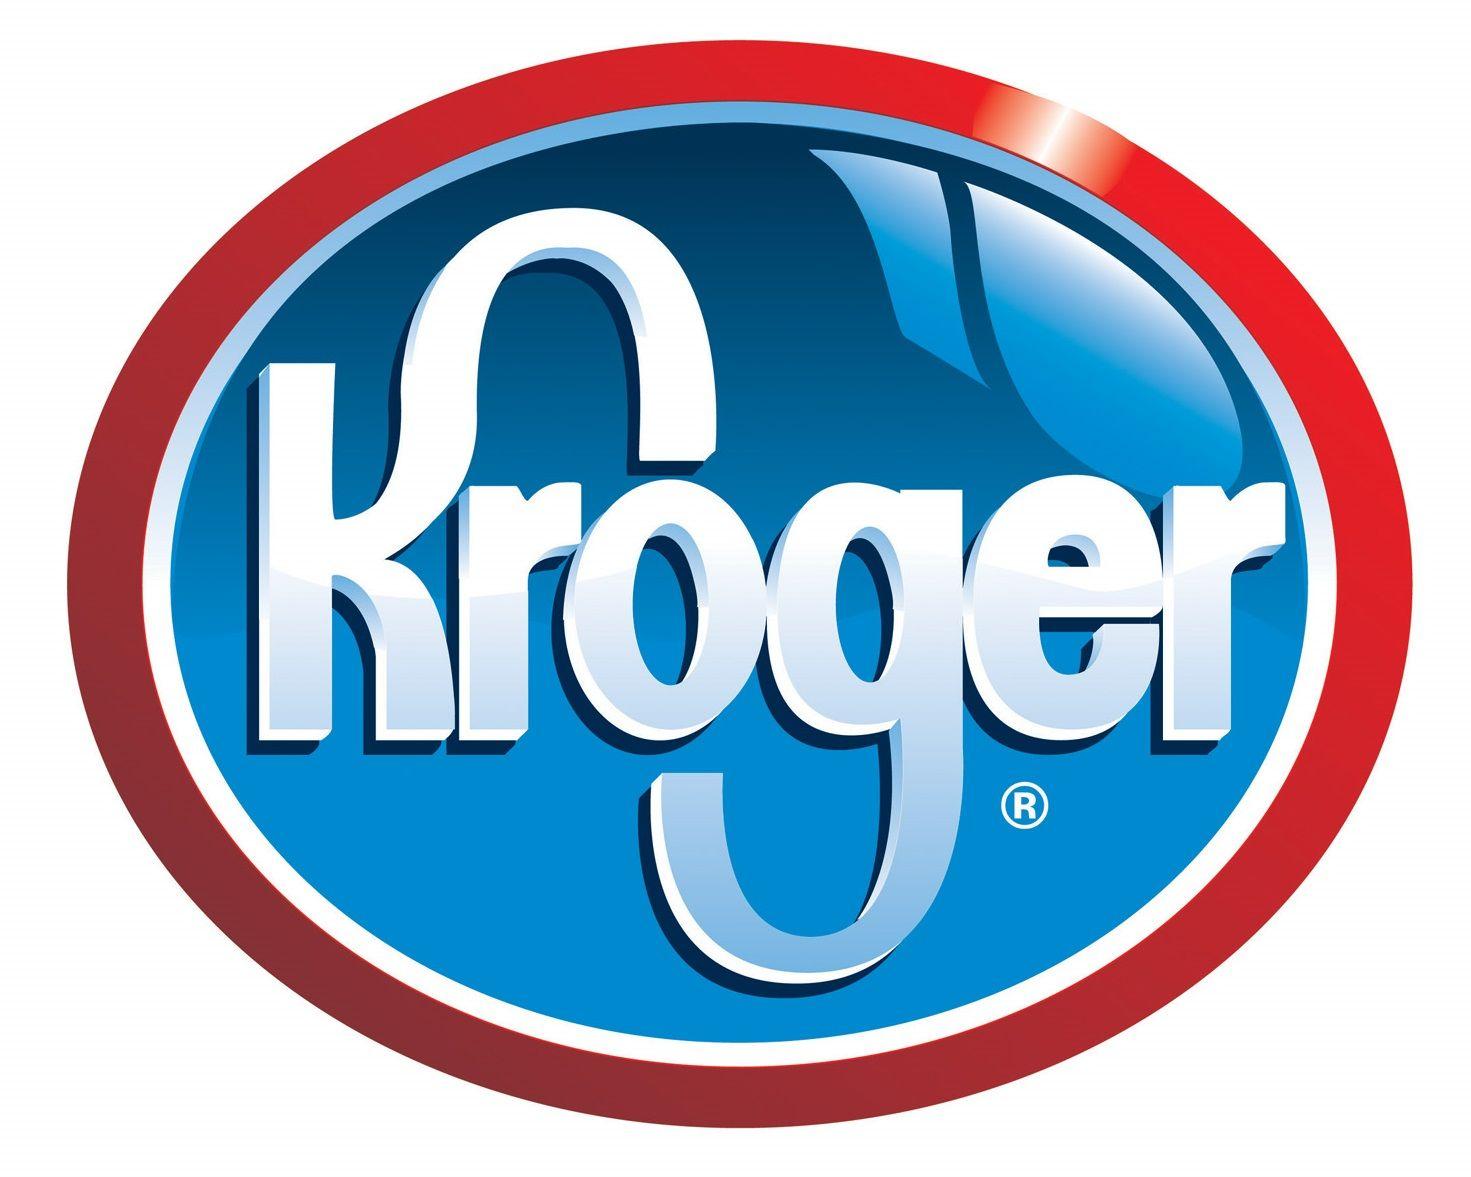 Dunnhumbyusa Logo - Kroger Acquires Most Of Customer Science Firm